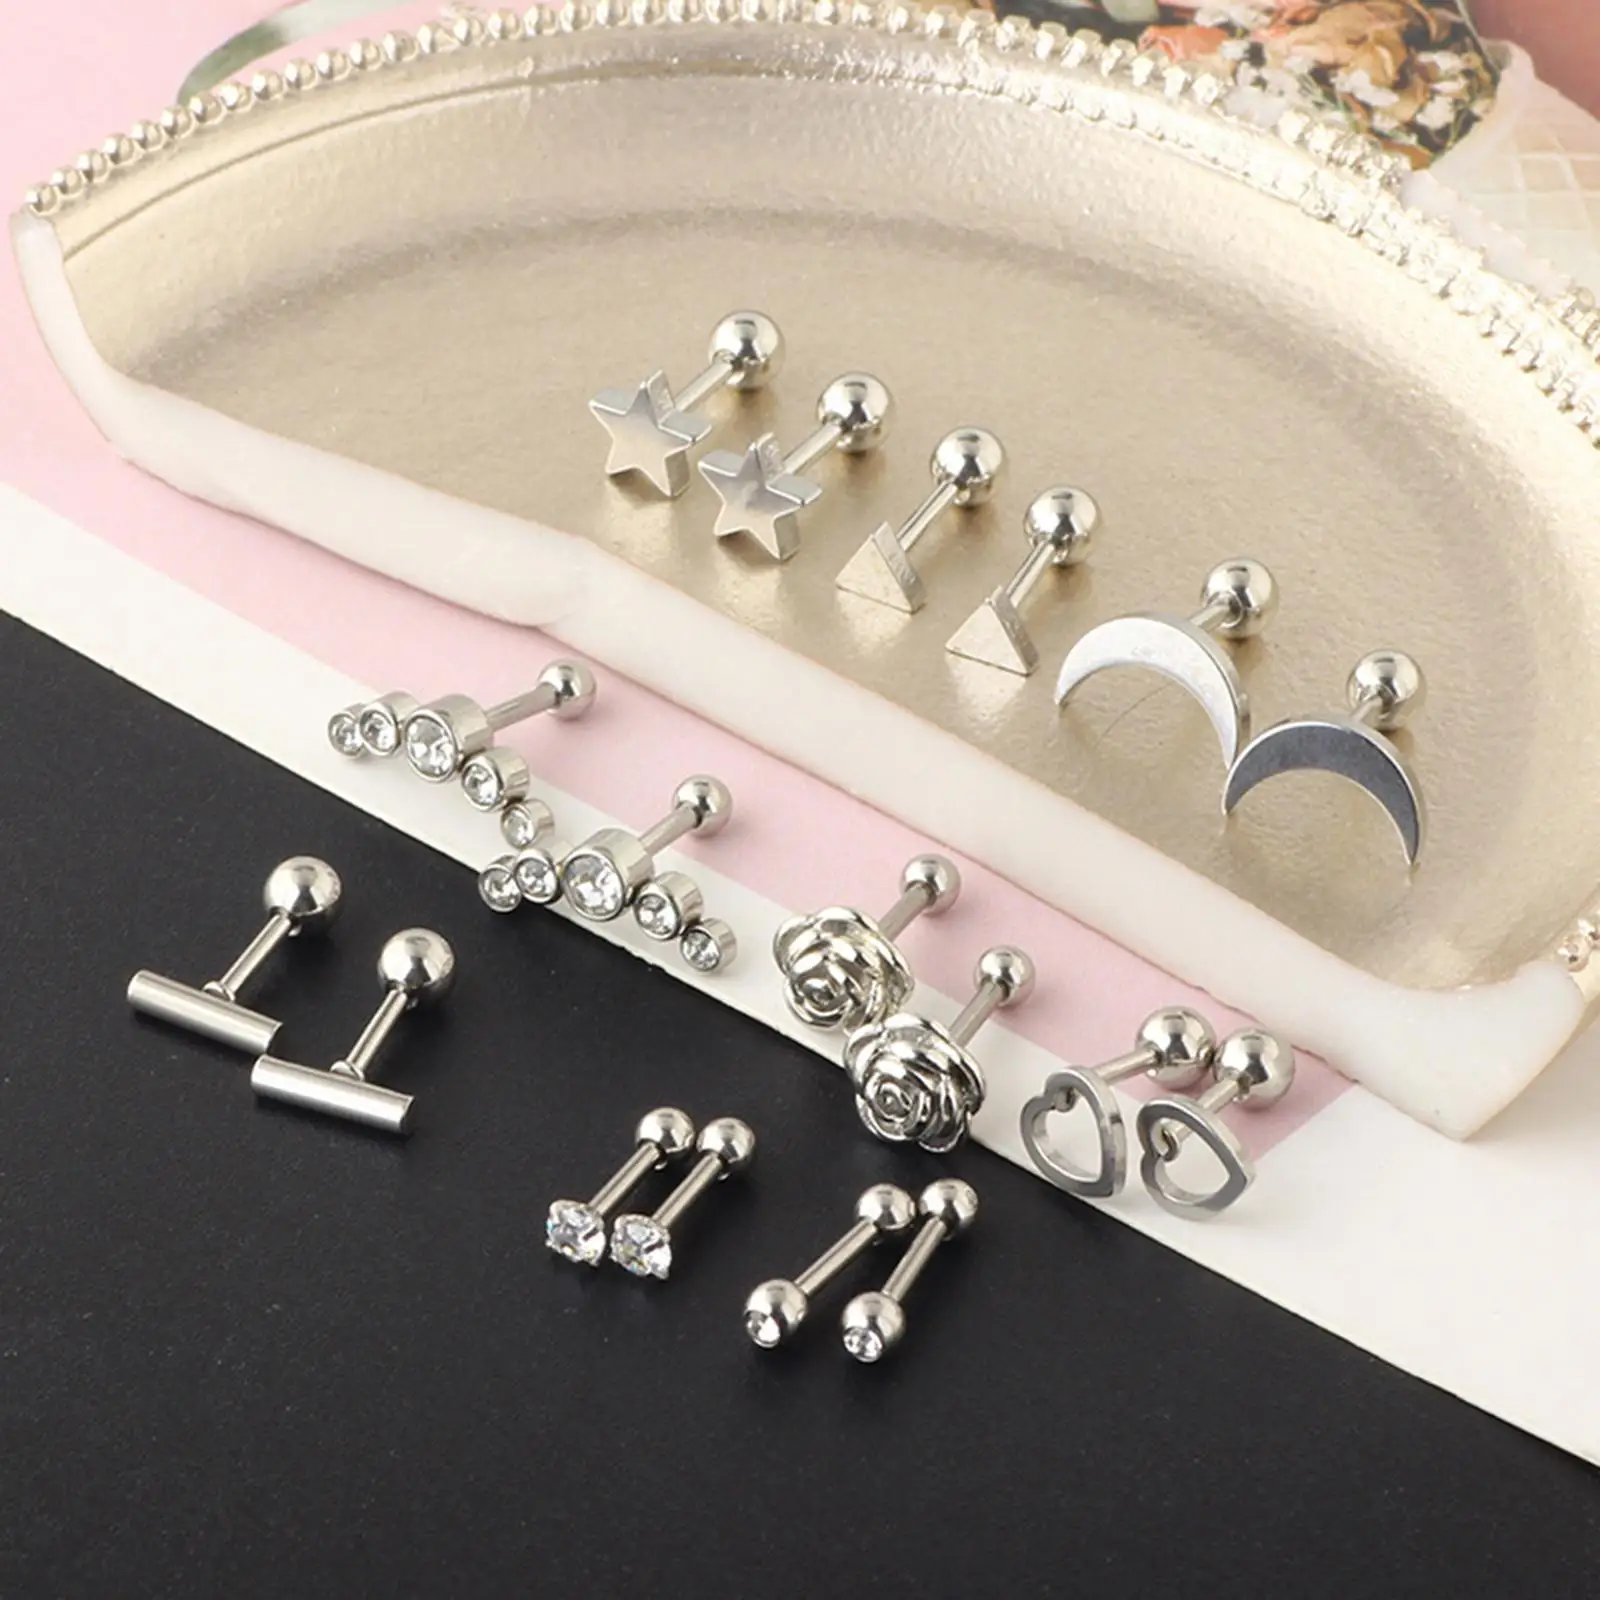 18Pcs Stud Earrings Set Fashion Disc Ball Jewelry Stainless Steel 16G